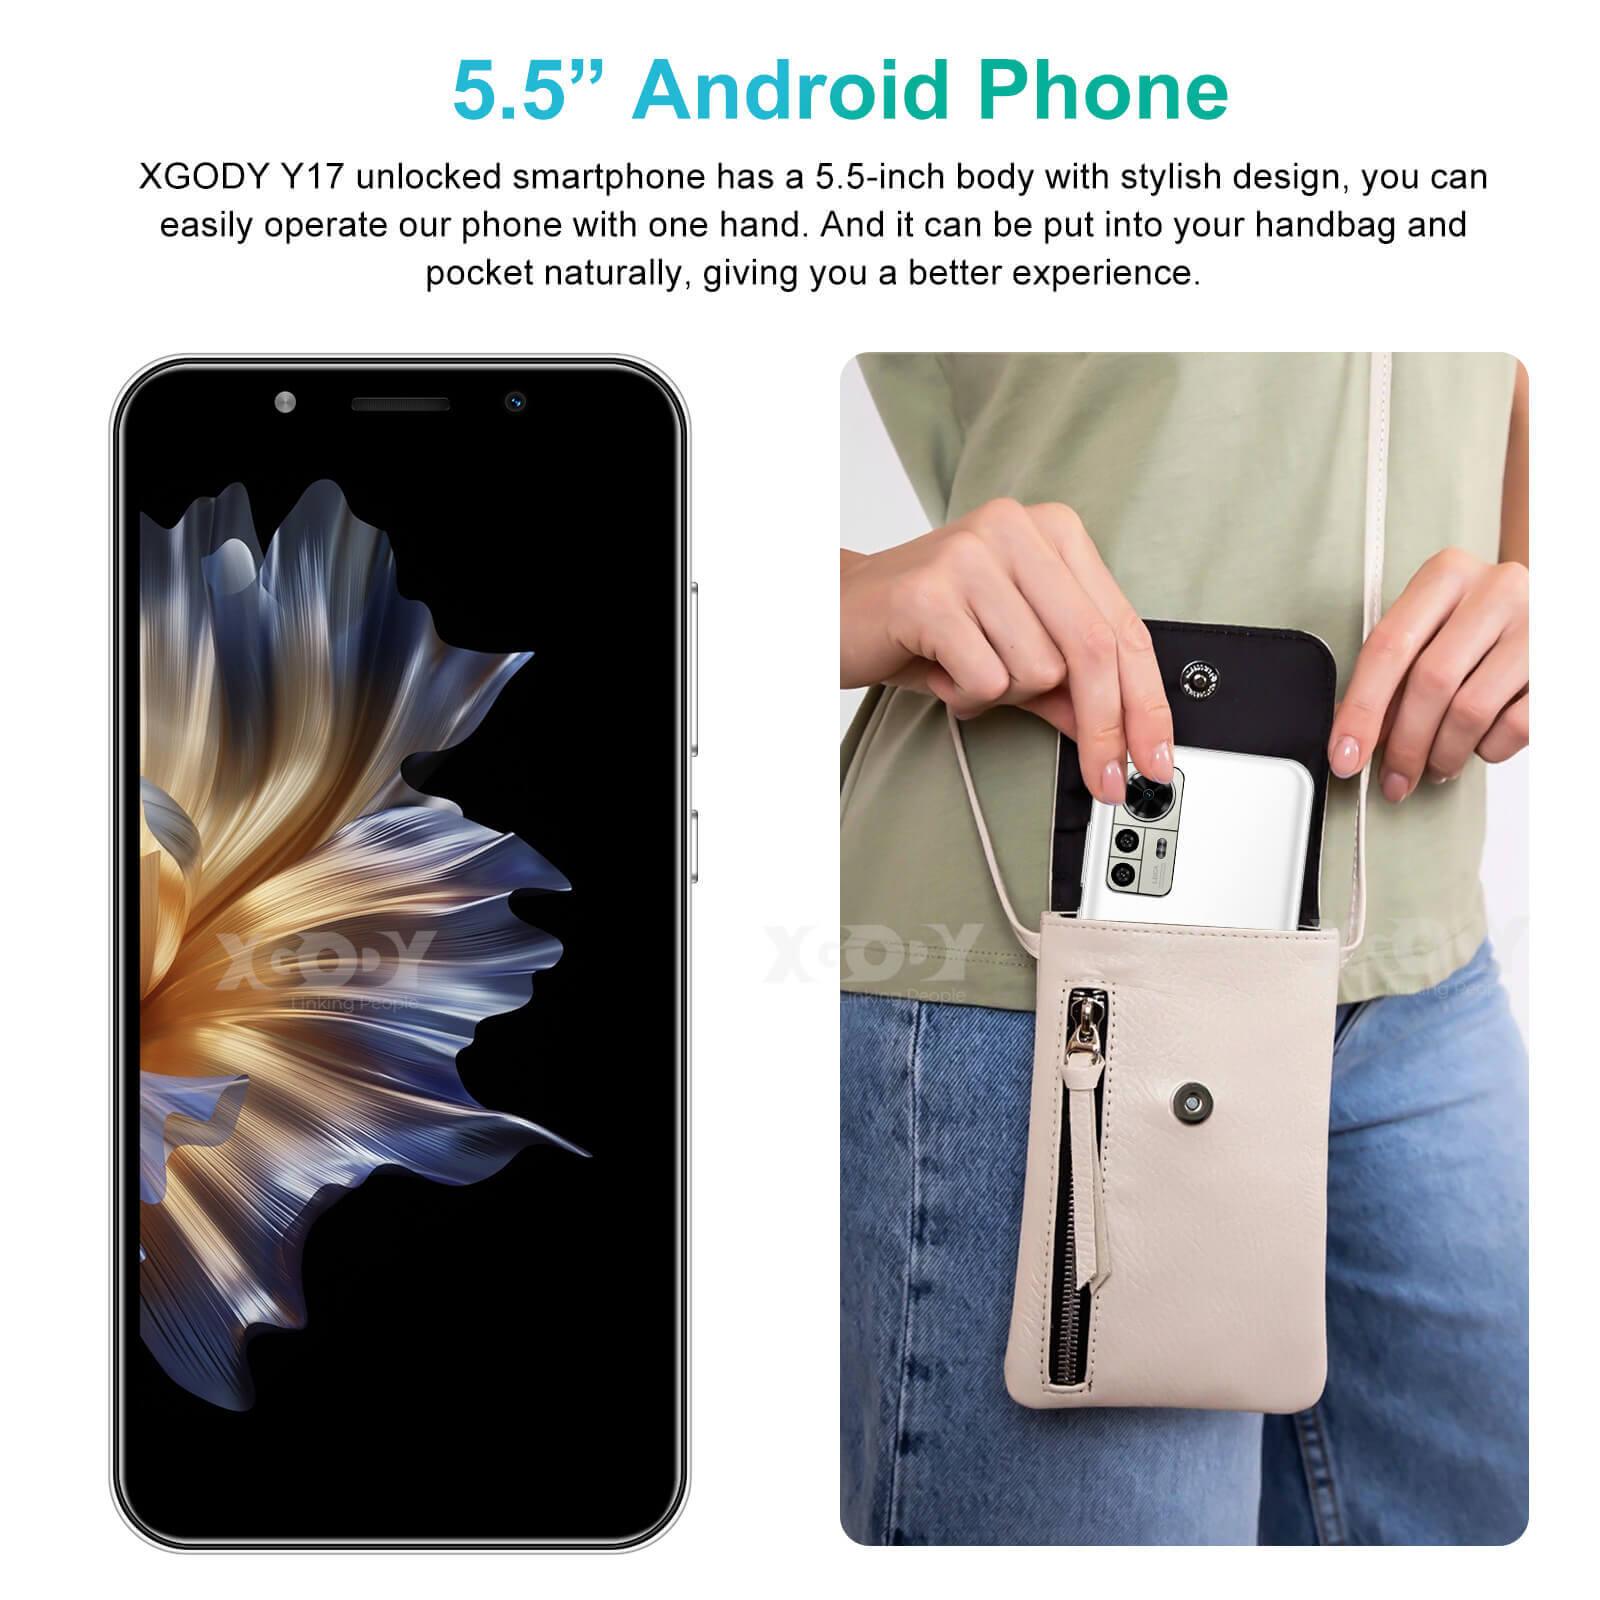 Cost-effective and Most worthwhile Y17 5.5" Android 4G LTE Phone With Dual Sim Phones Unlocked And Free Android Phone Case - XGODY 